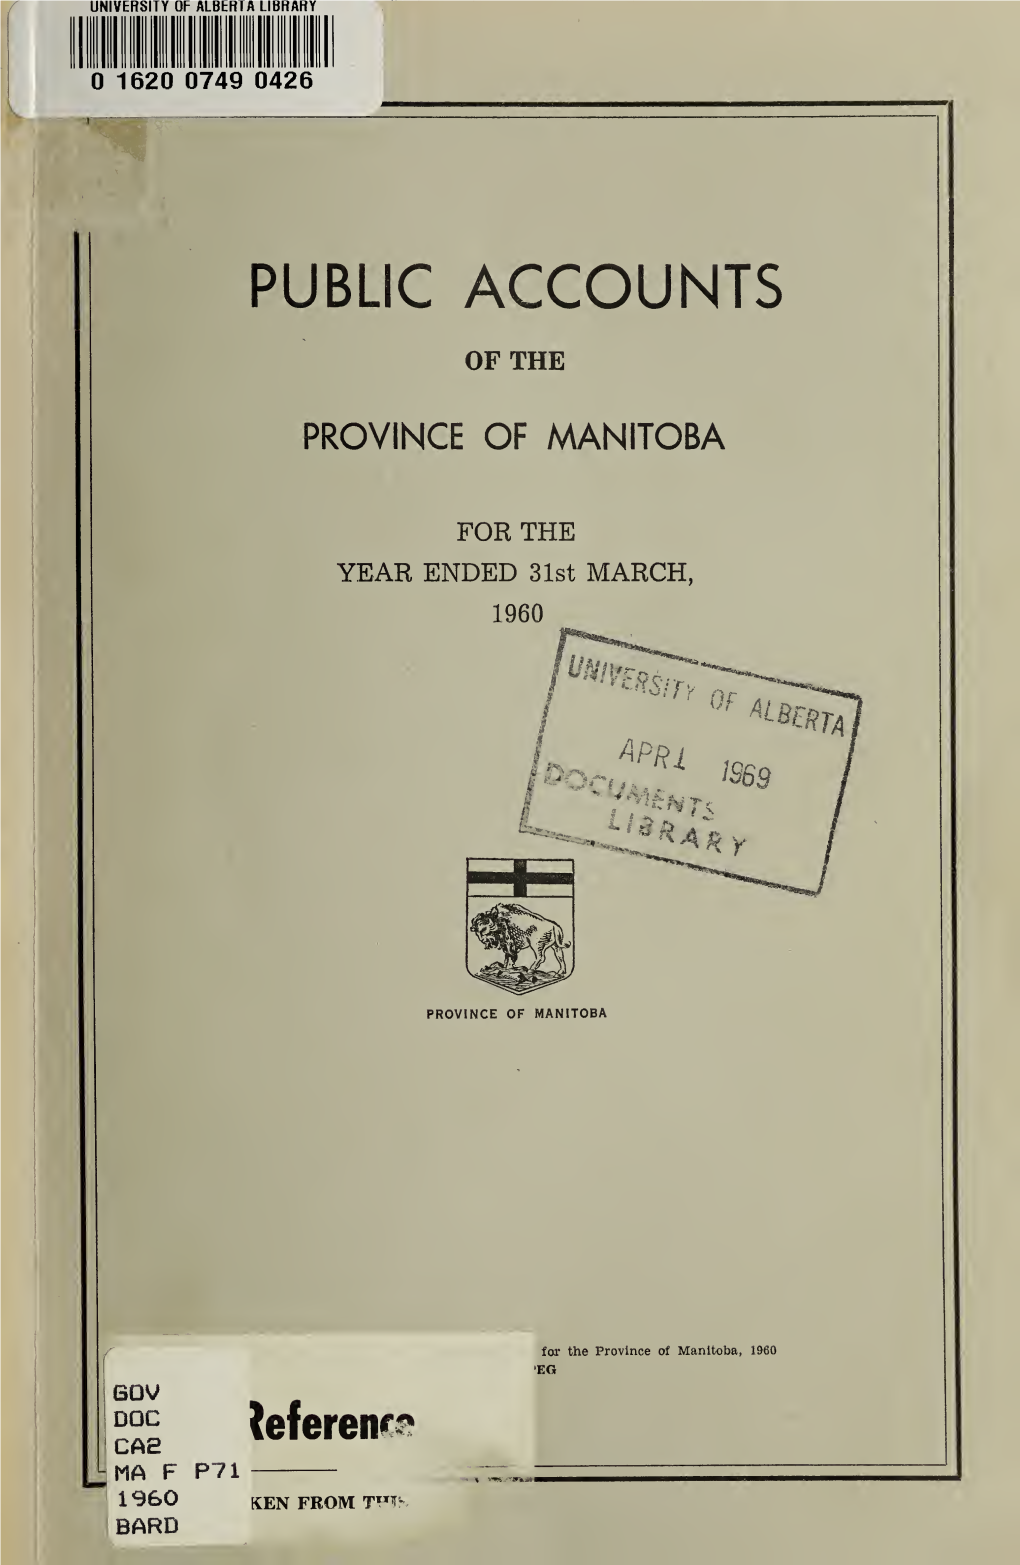 Public Accounts of the Province of Manitoba for the Year Ended 31St March, 1960